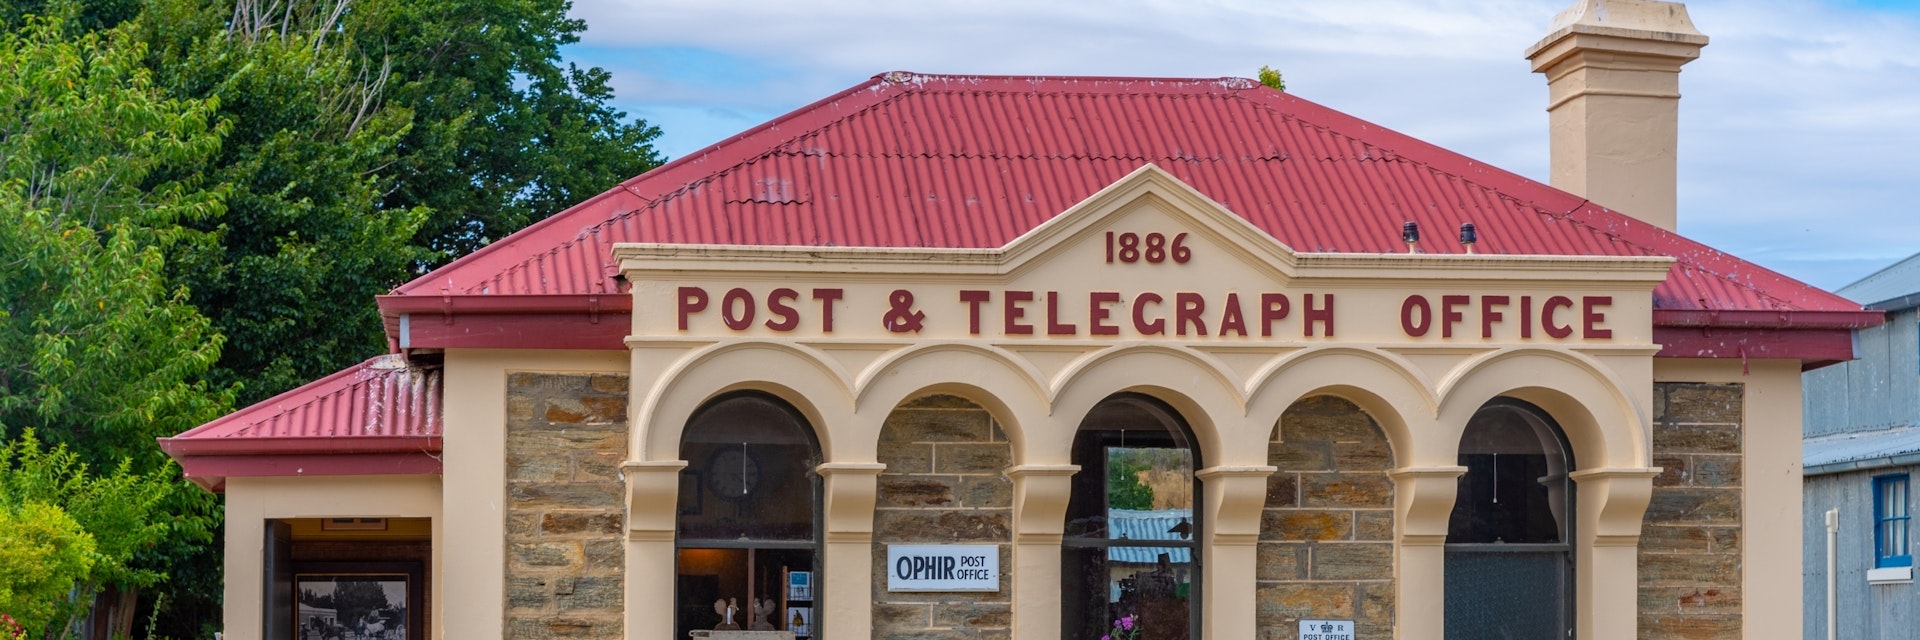 Post and Telegraph office in Ophir, New Zealand.